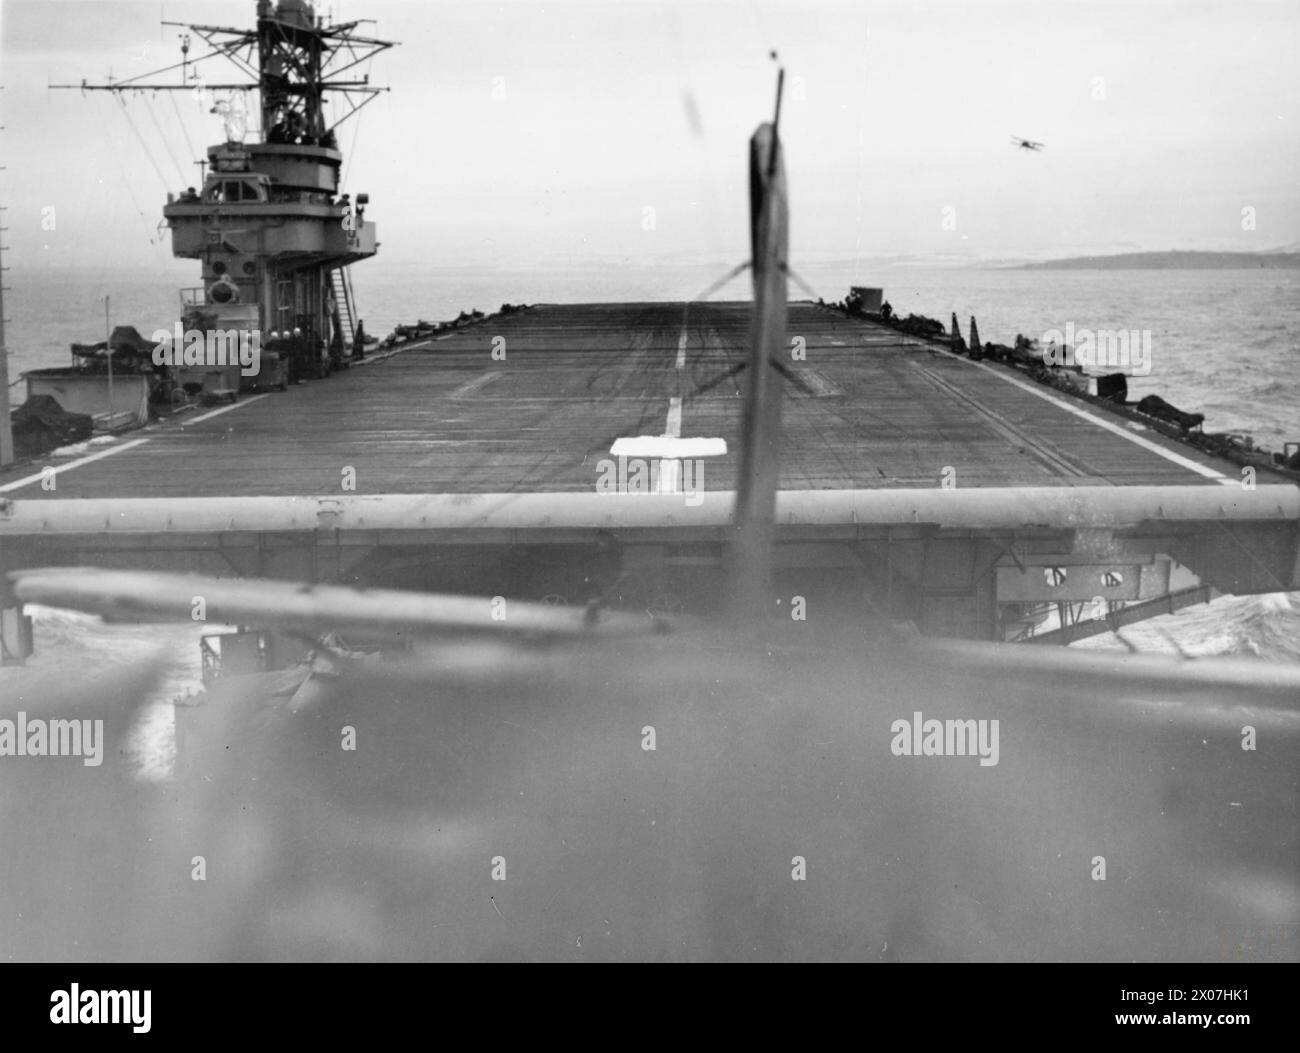 WITH THE ESCORT CARRIER HMS SMITER. 1944, AT SEA, ON BOARD A FAIREY SWORDFISH OF THE CARRIER DURING THE TRAINING OF DECK LANDING CONTROL OFFICERS, WHEN AIRCRAFT WERE TAKING OFF AND LANDING ON. - Looking back from a Fairey Swordfish as it took off from the SMITER Stock Photo